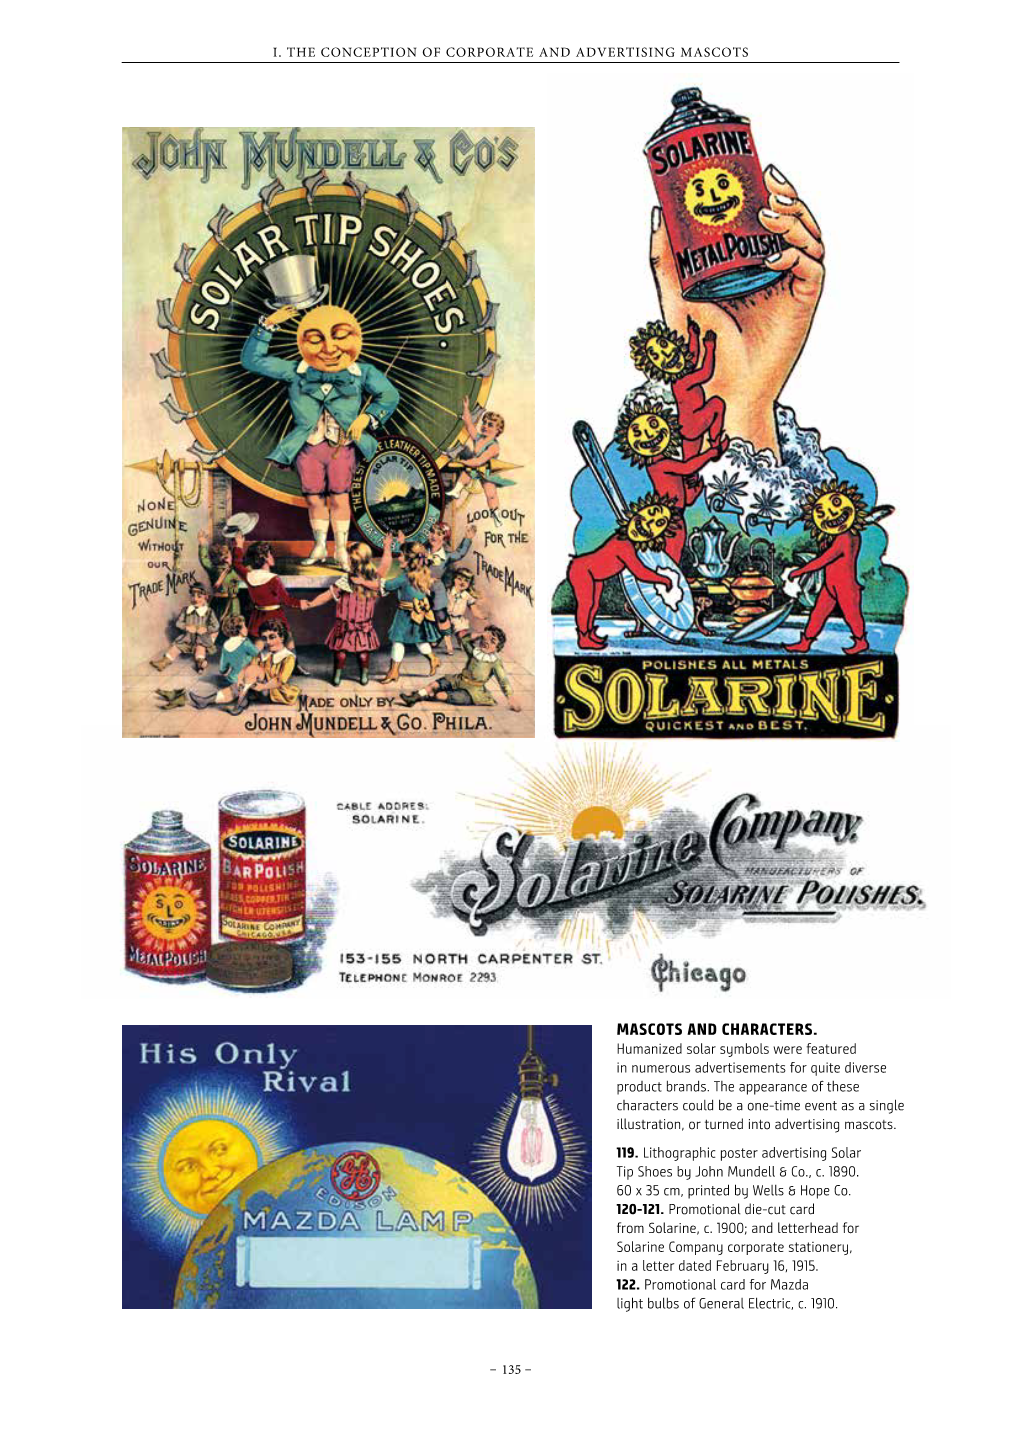 MASCOTS and CHARACTERS. Humanized Solar Symbols Were Featured in Numerous Advertisements for Quite Diverse Product Brands